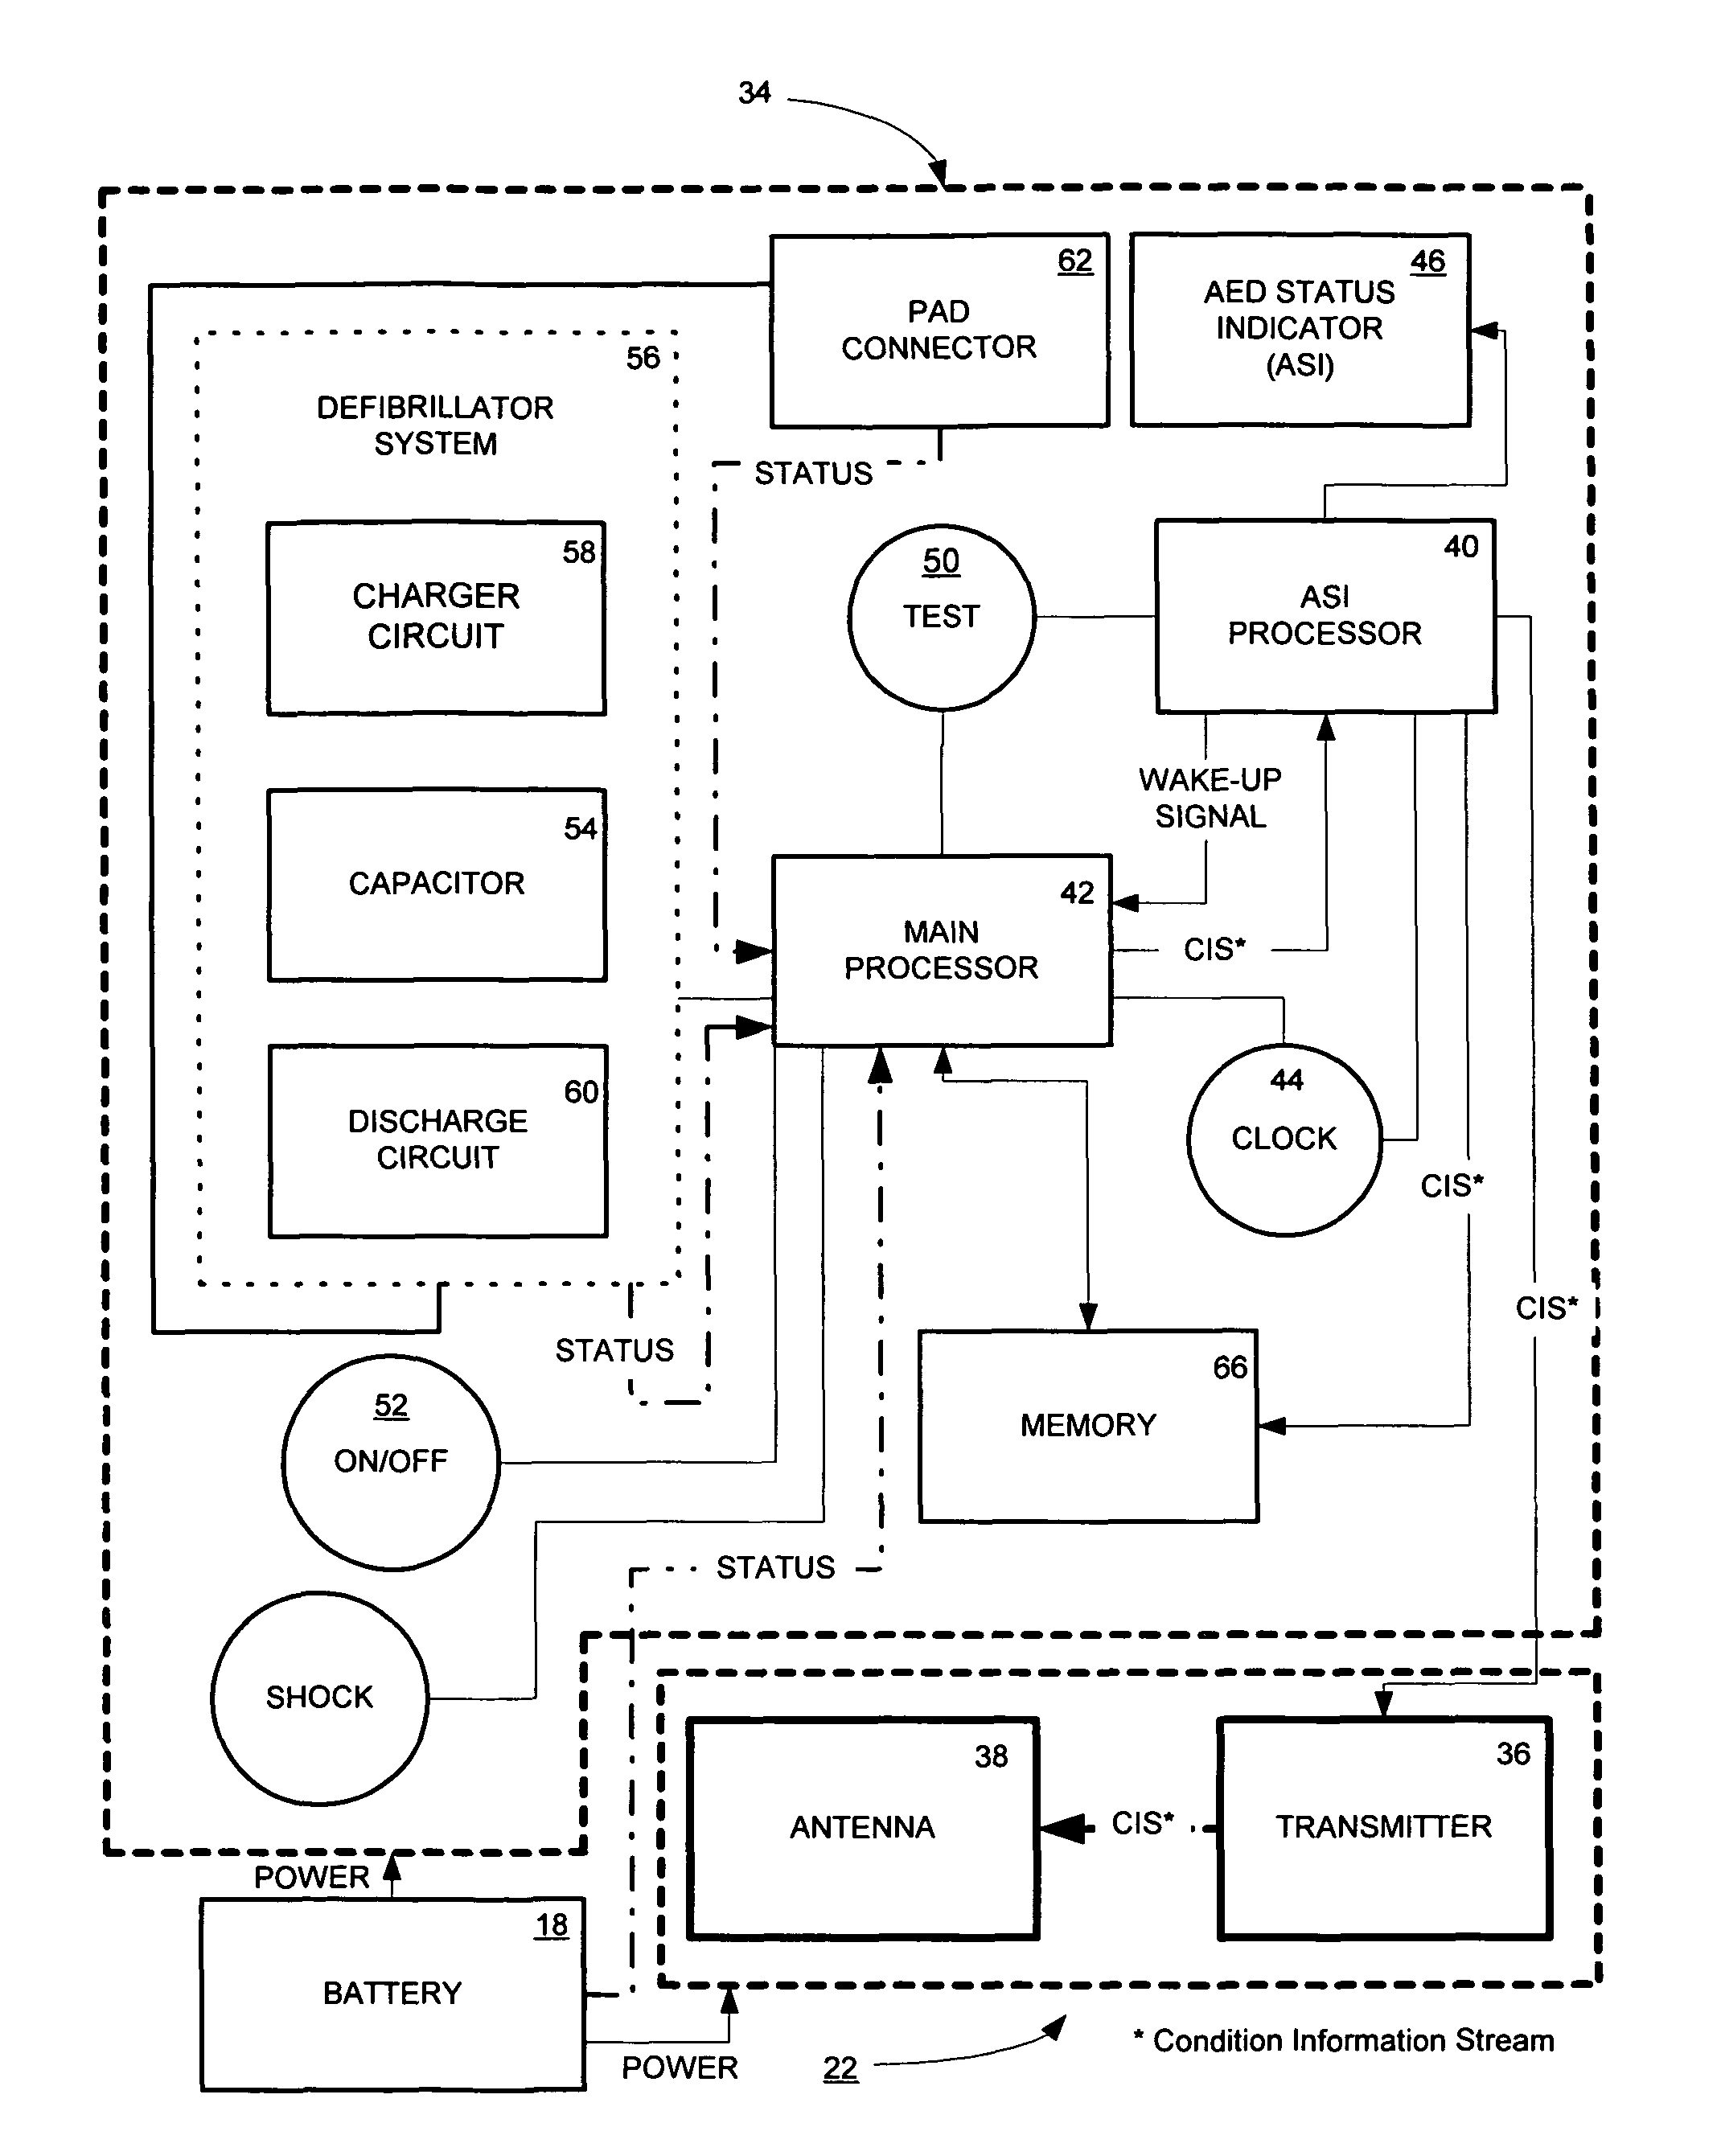 System and method for monitoring external portable medical devices